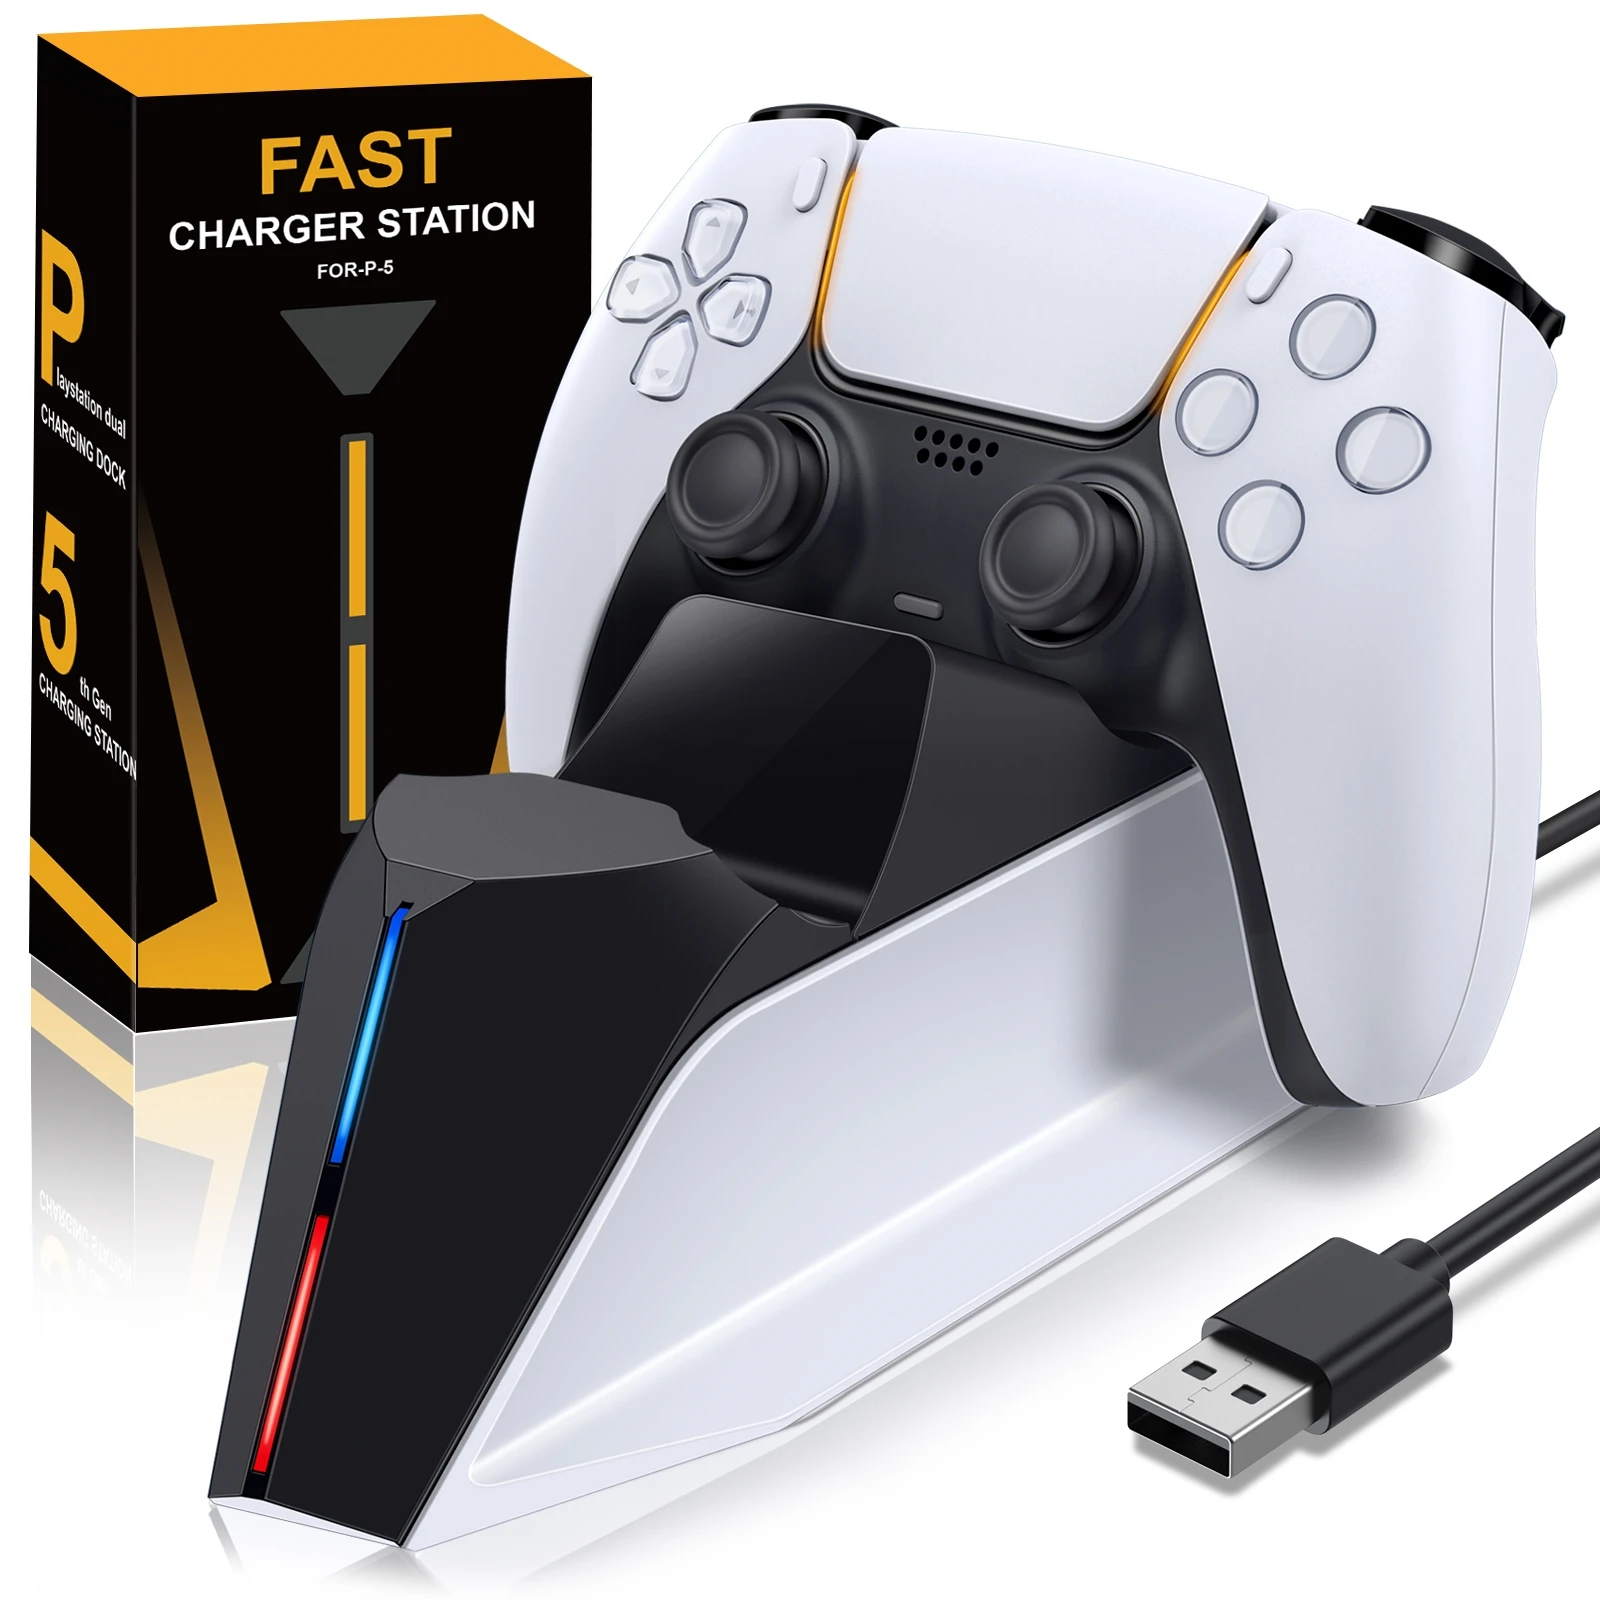 New Dual Fast Charger For PS5 Controller Type-C Charging Dock Station For Sony Playstation 5 Gamepad Charger For PS5 Accessories